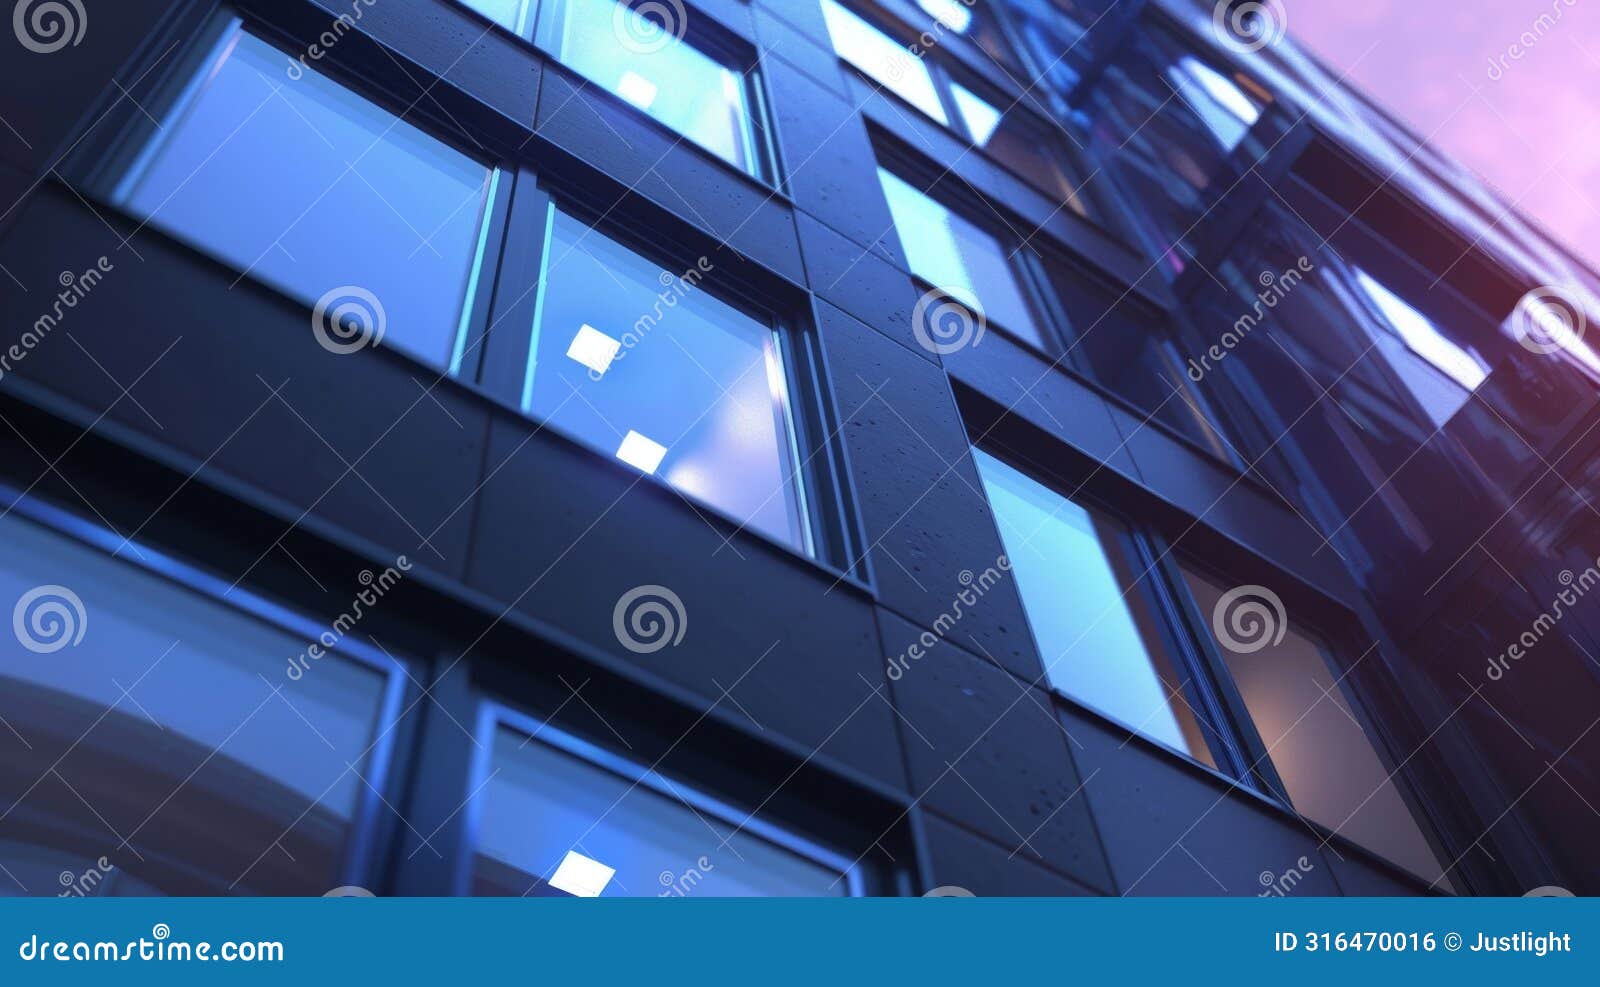 a residential building with windows that automatically adjust their tint based on the occupants neural feedback